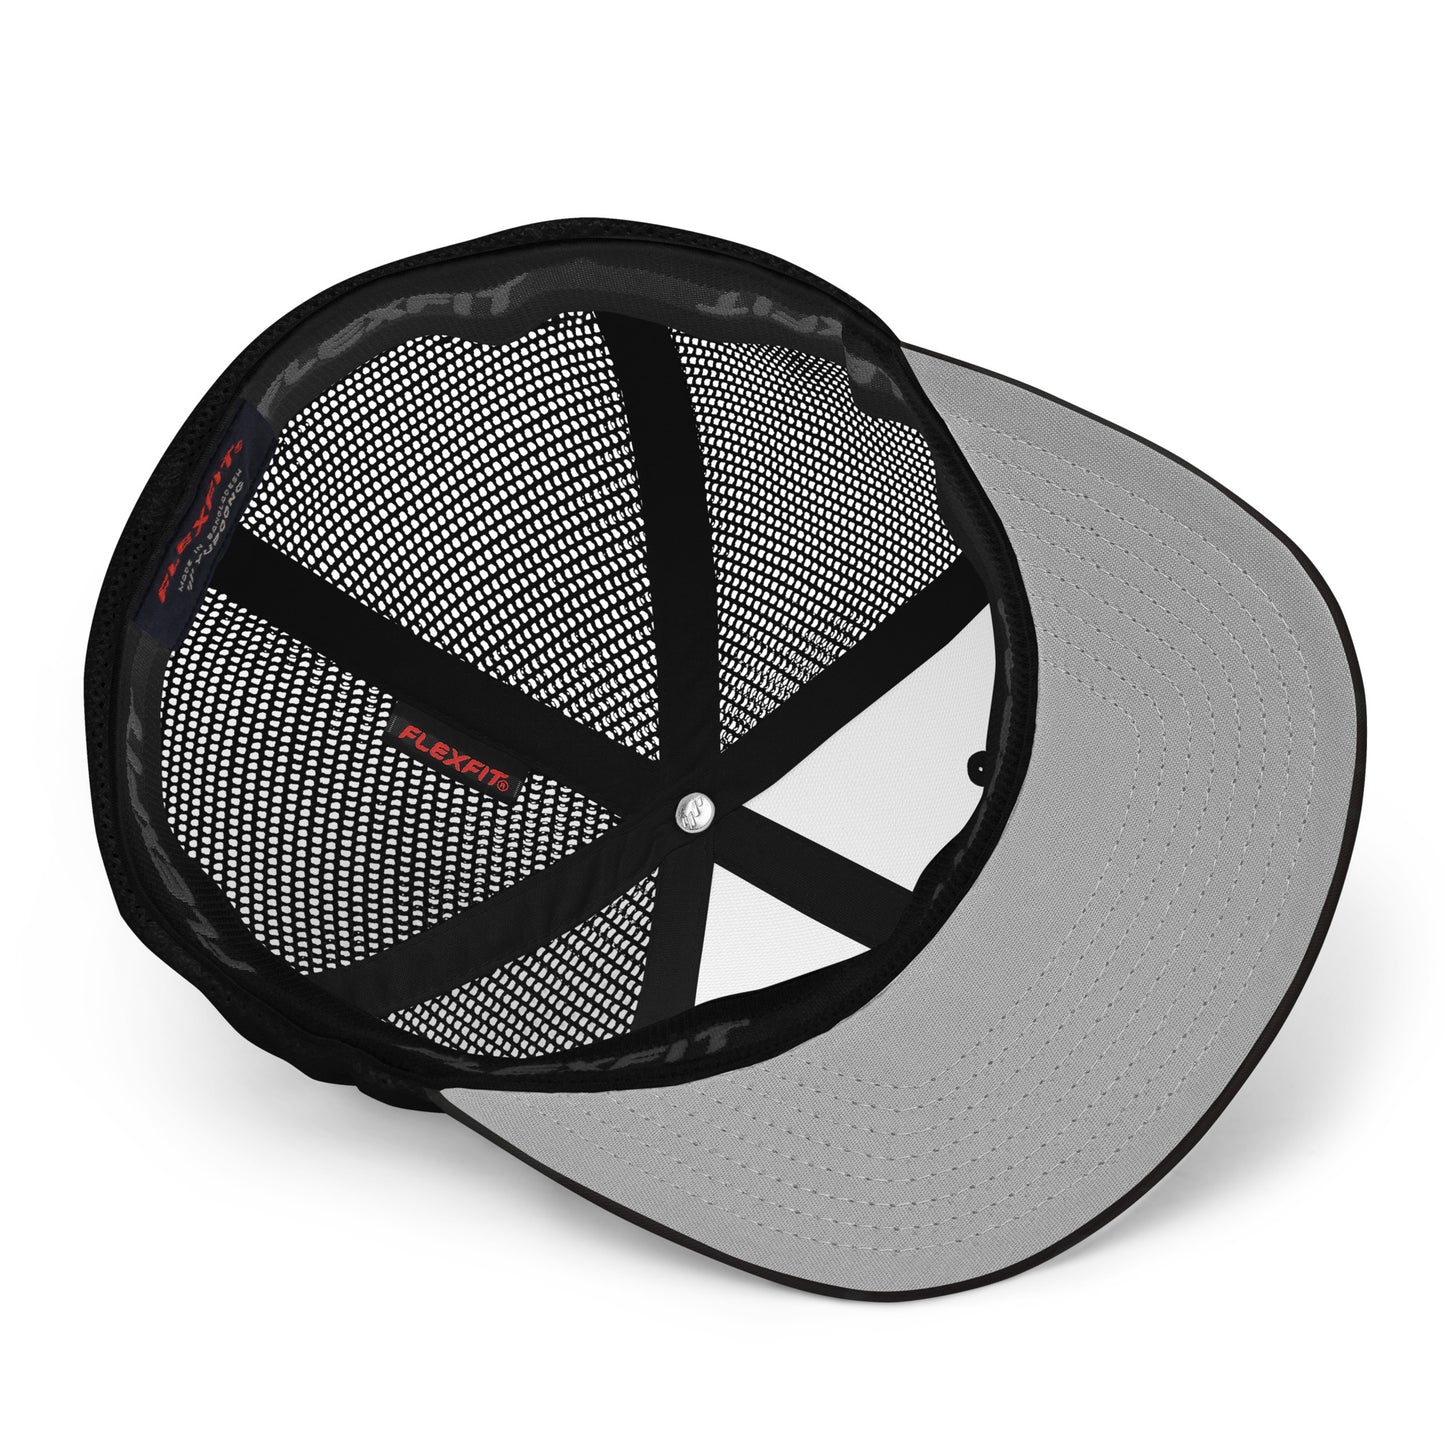 FOR THE STREETS Closed-back trucker cap